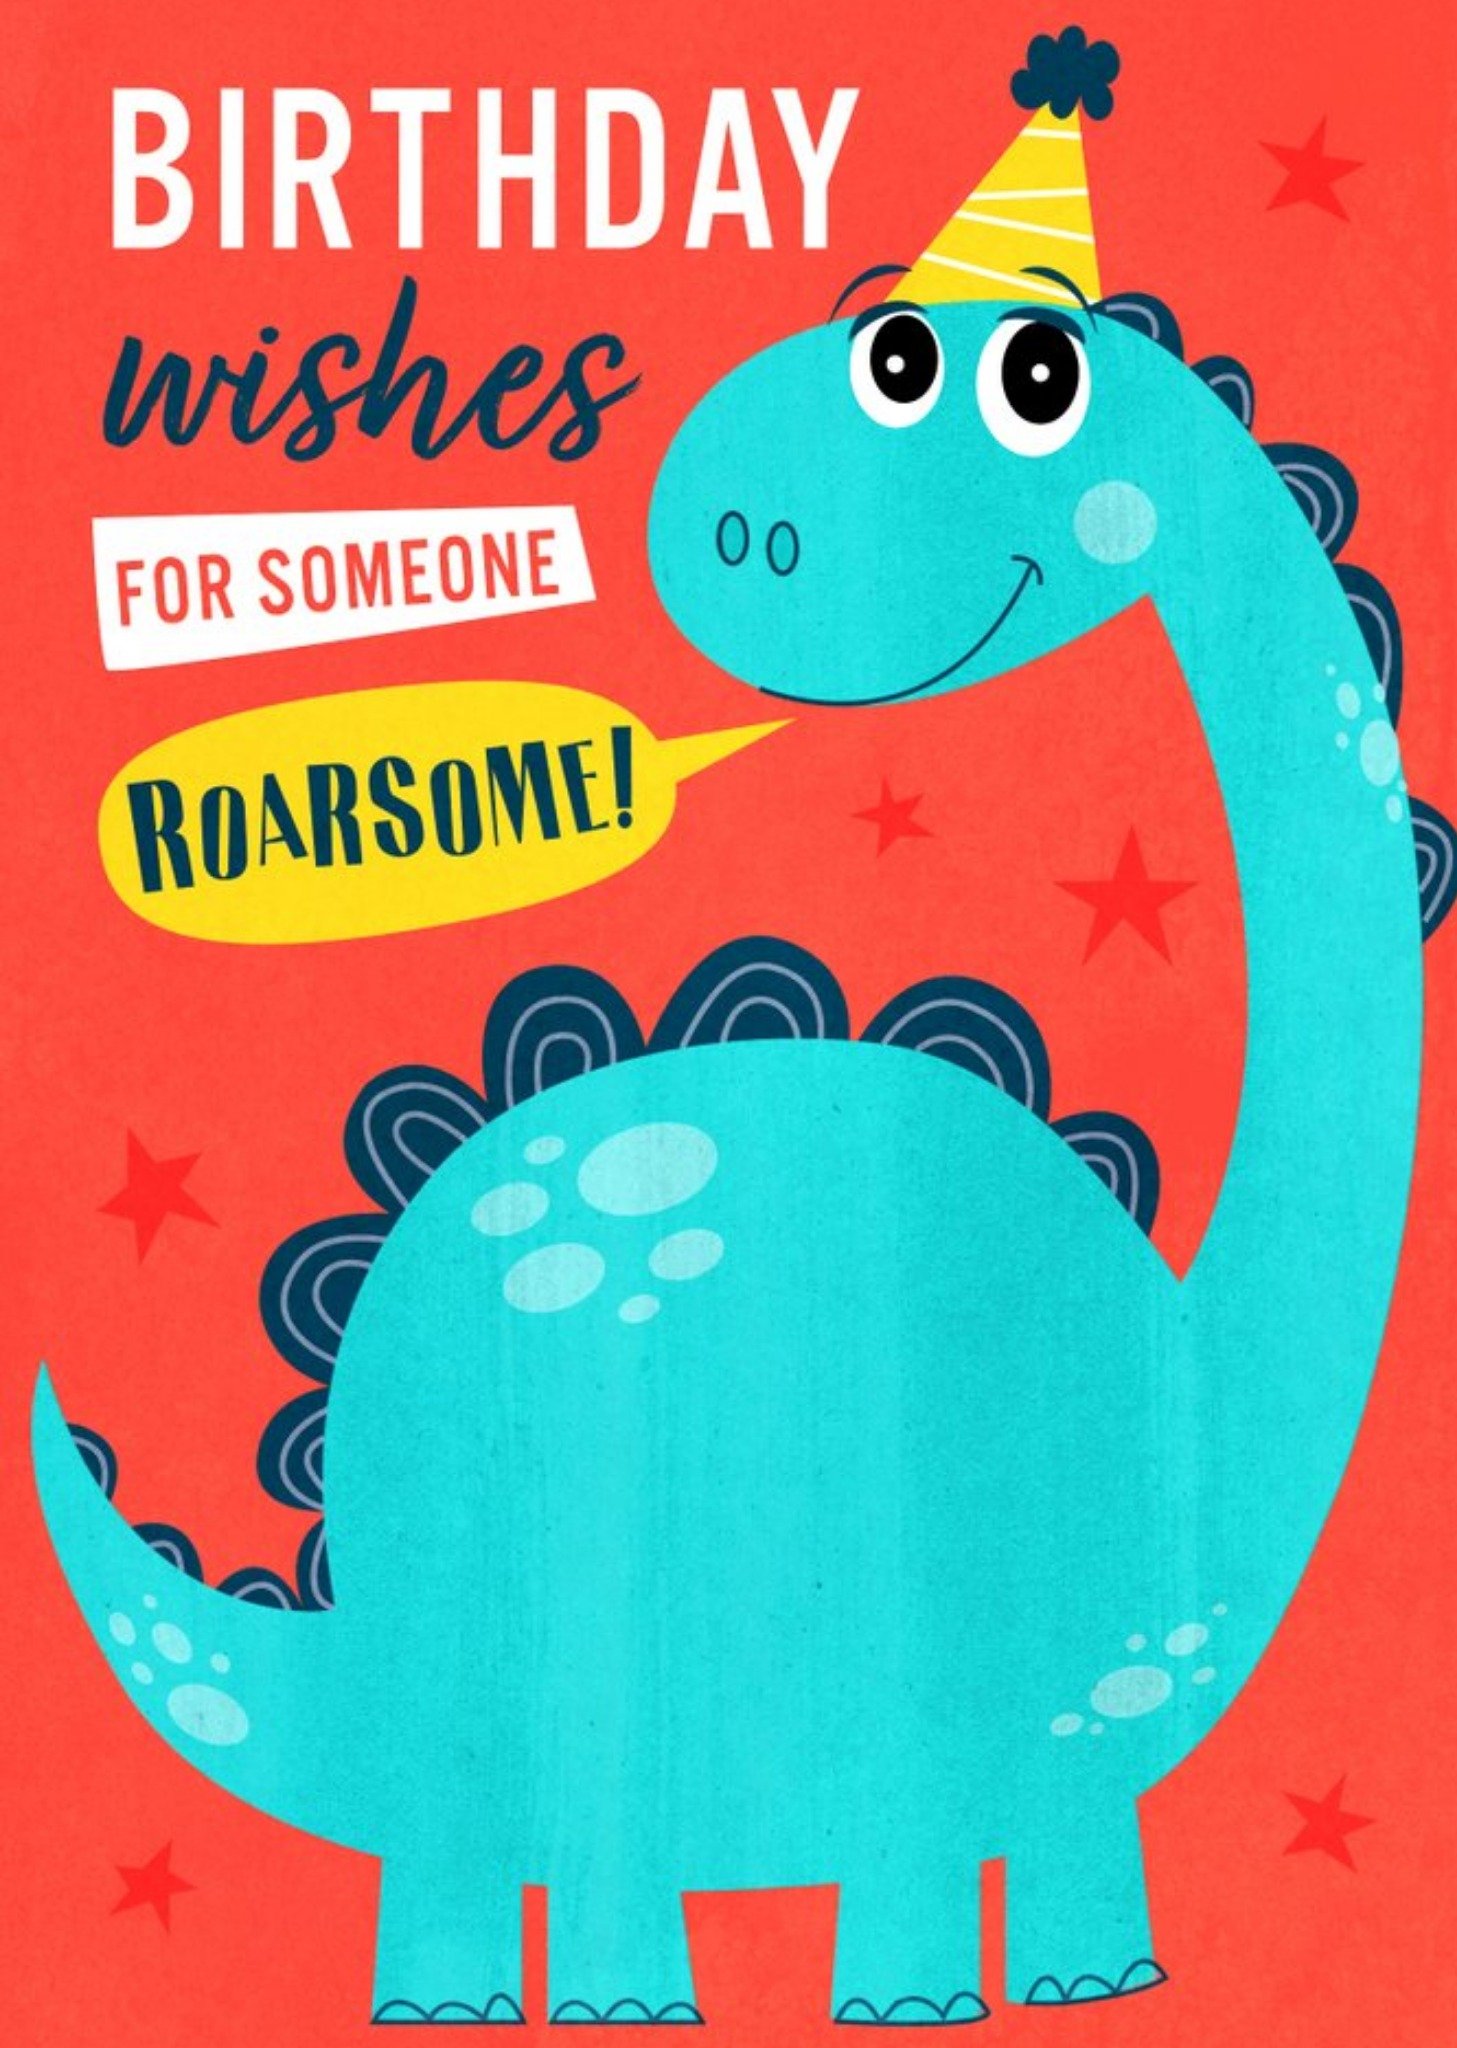 Moonpig Birthday Wishes For Someone Roarsome Dinosaur Card, Large